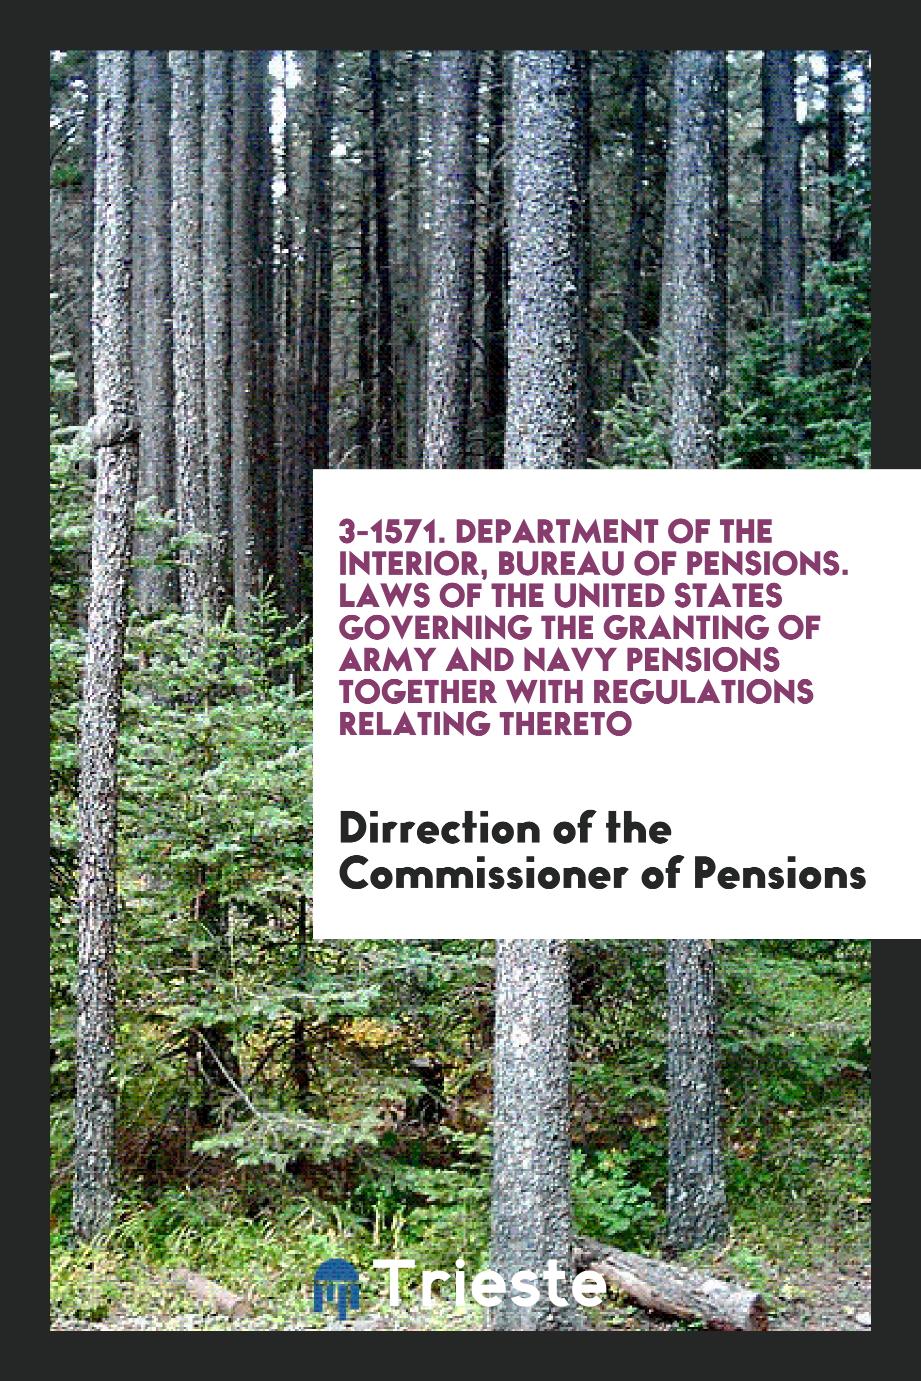 3-1571. Department of the Interior, Bureau of Pensions. Laws of the United States Governing the Granting of Army and Navy Pensions Together with Regulations Relating Thereto